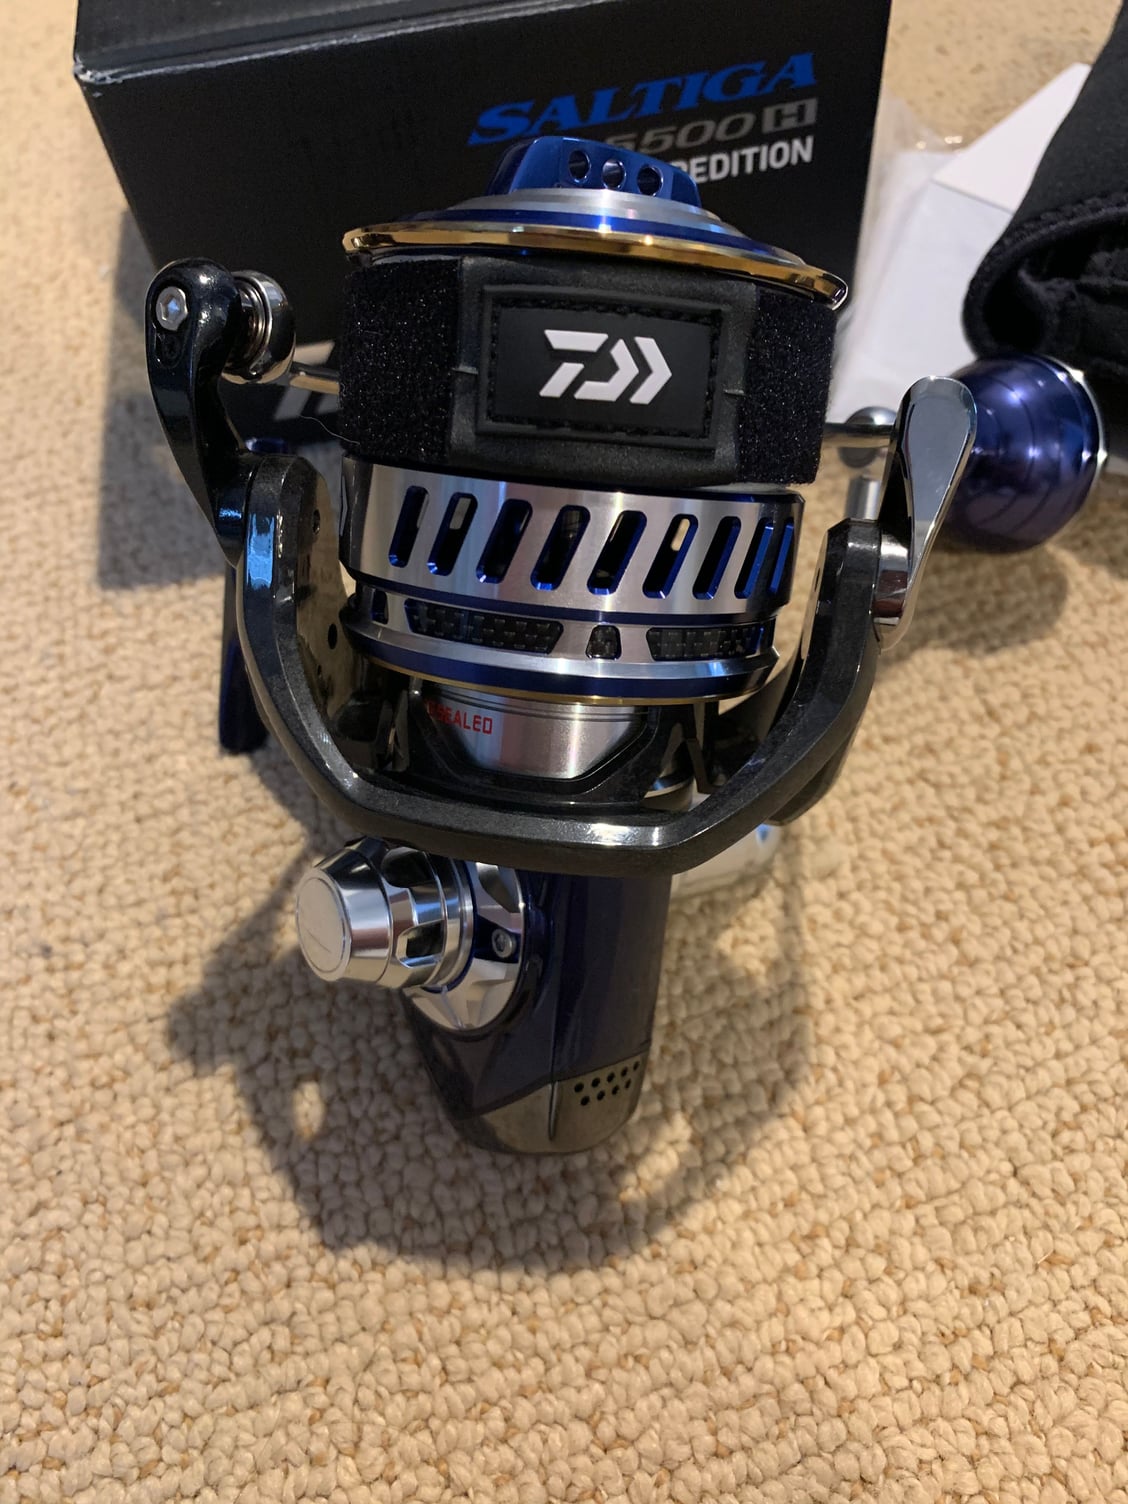 Daiwa Saltiga 8000-H Spinning Reel For Sale Mint Condition